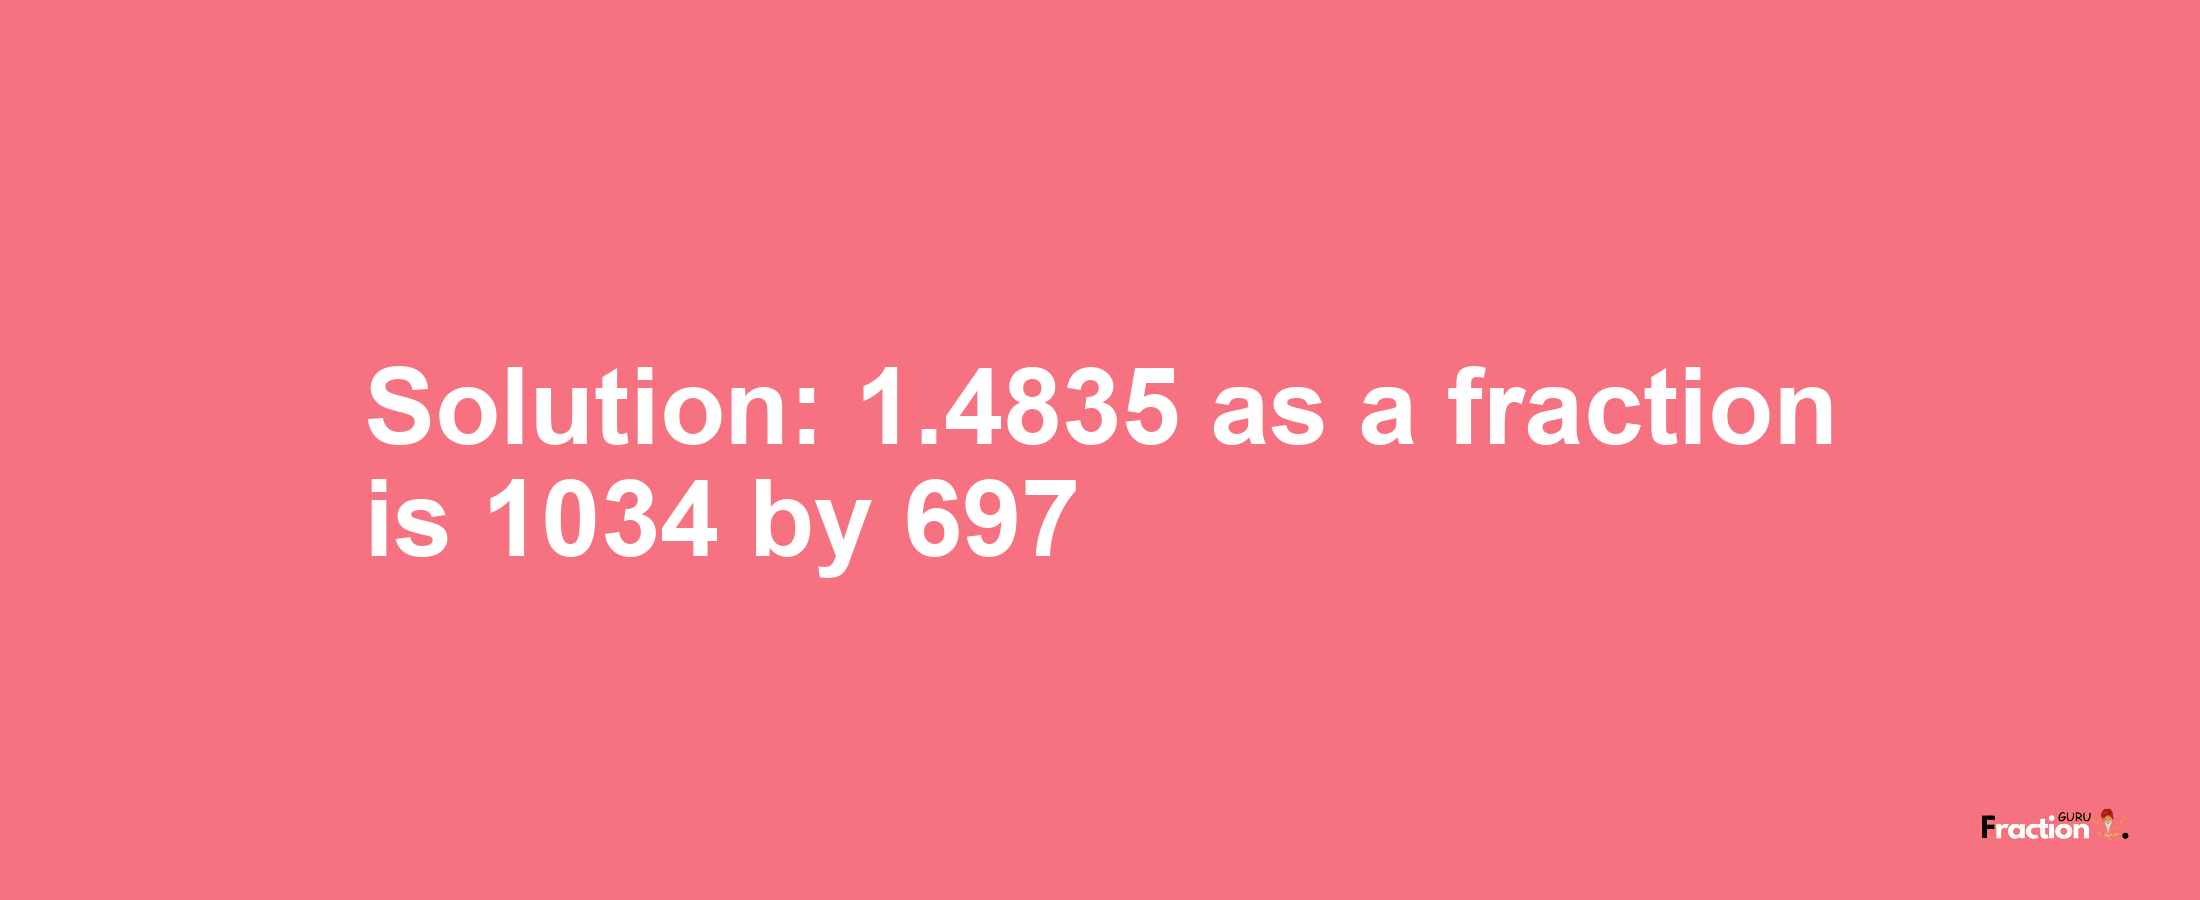 Solution:1.4835 as a fraction is 1034/697